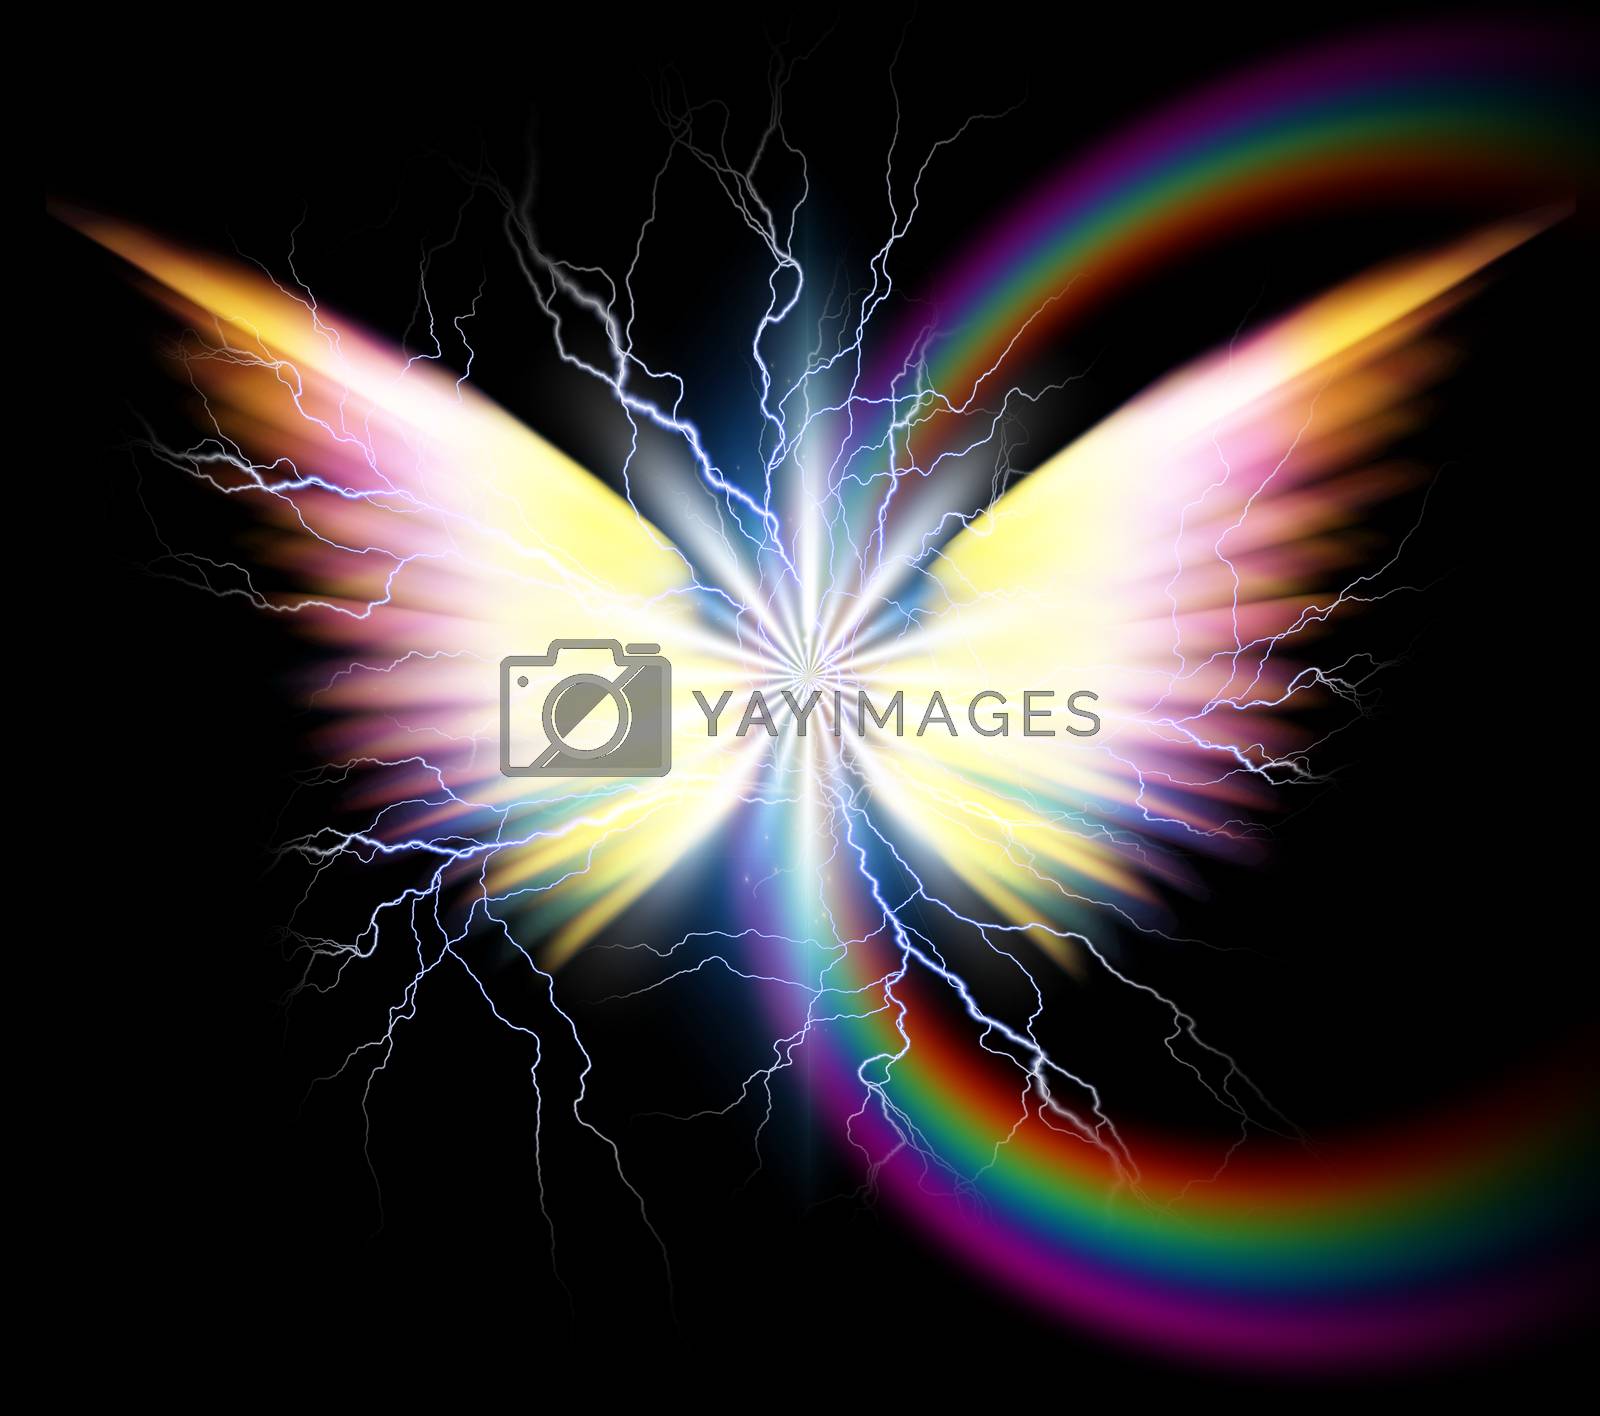 Royalty free image of Angel wings and rainbow by applesstock